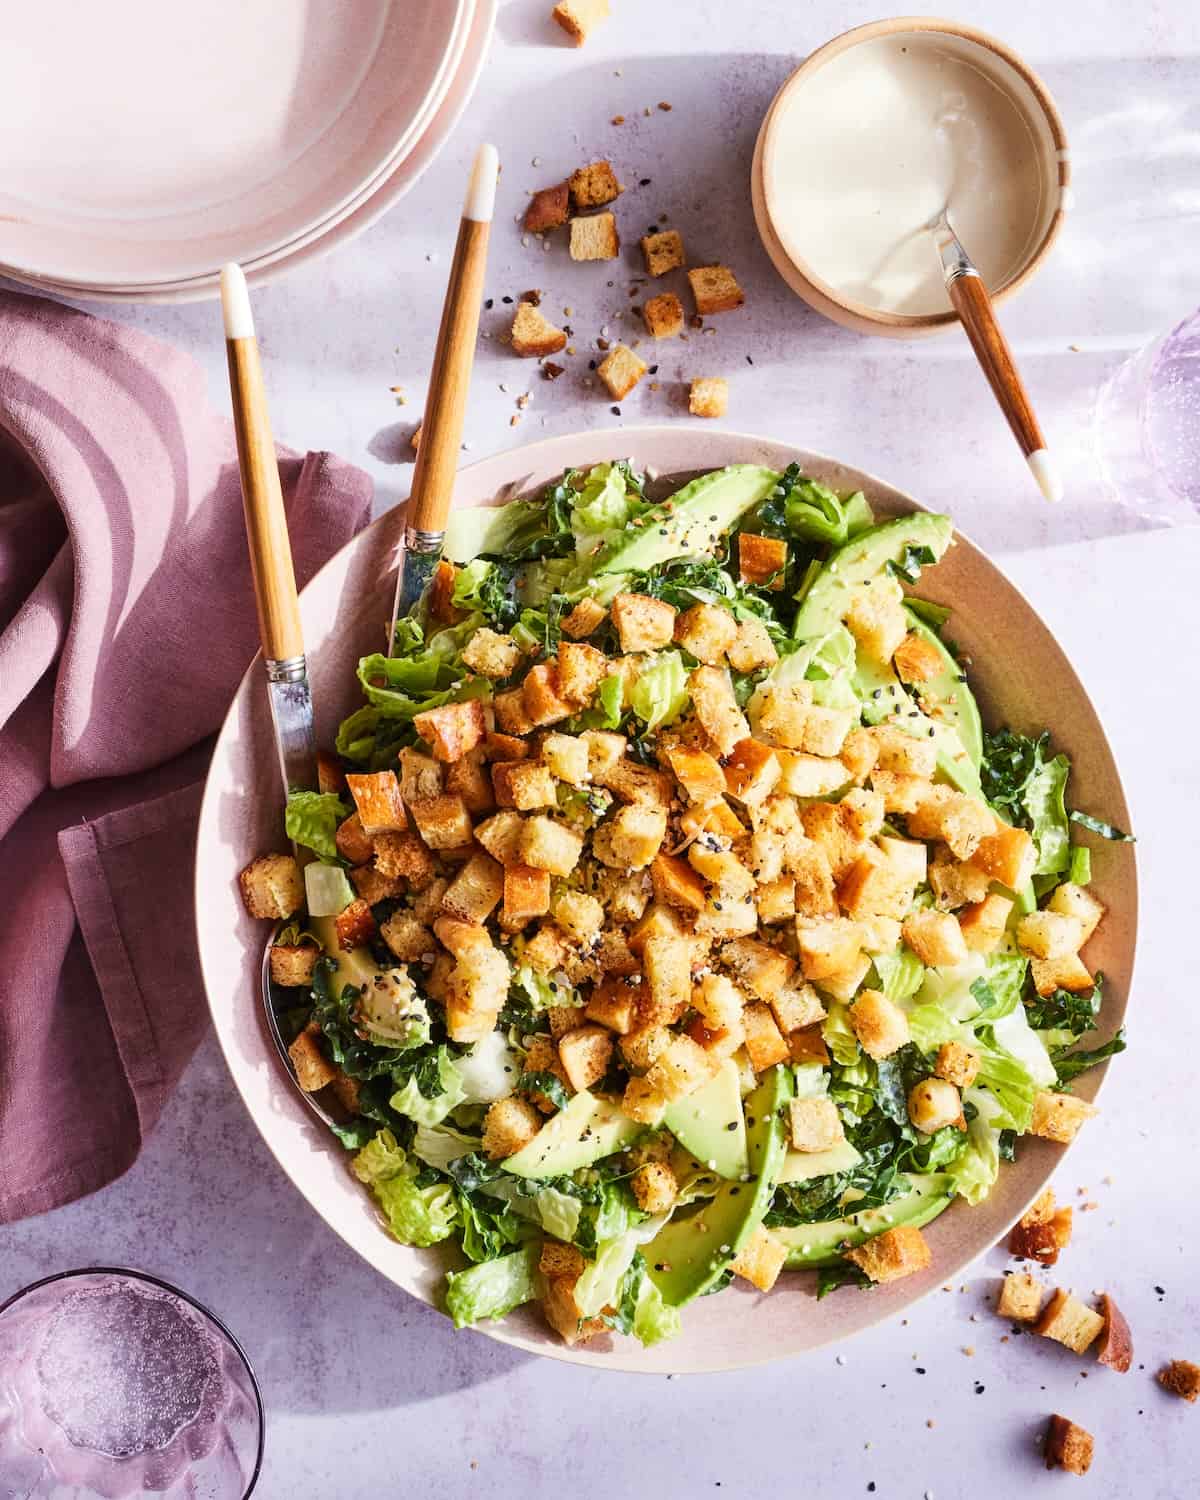 A low bowl with an avocado kale caesar salad, with some extra dressing in a small bowl on the side, and a pink kitchen towel next to it.